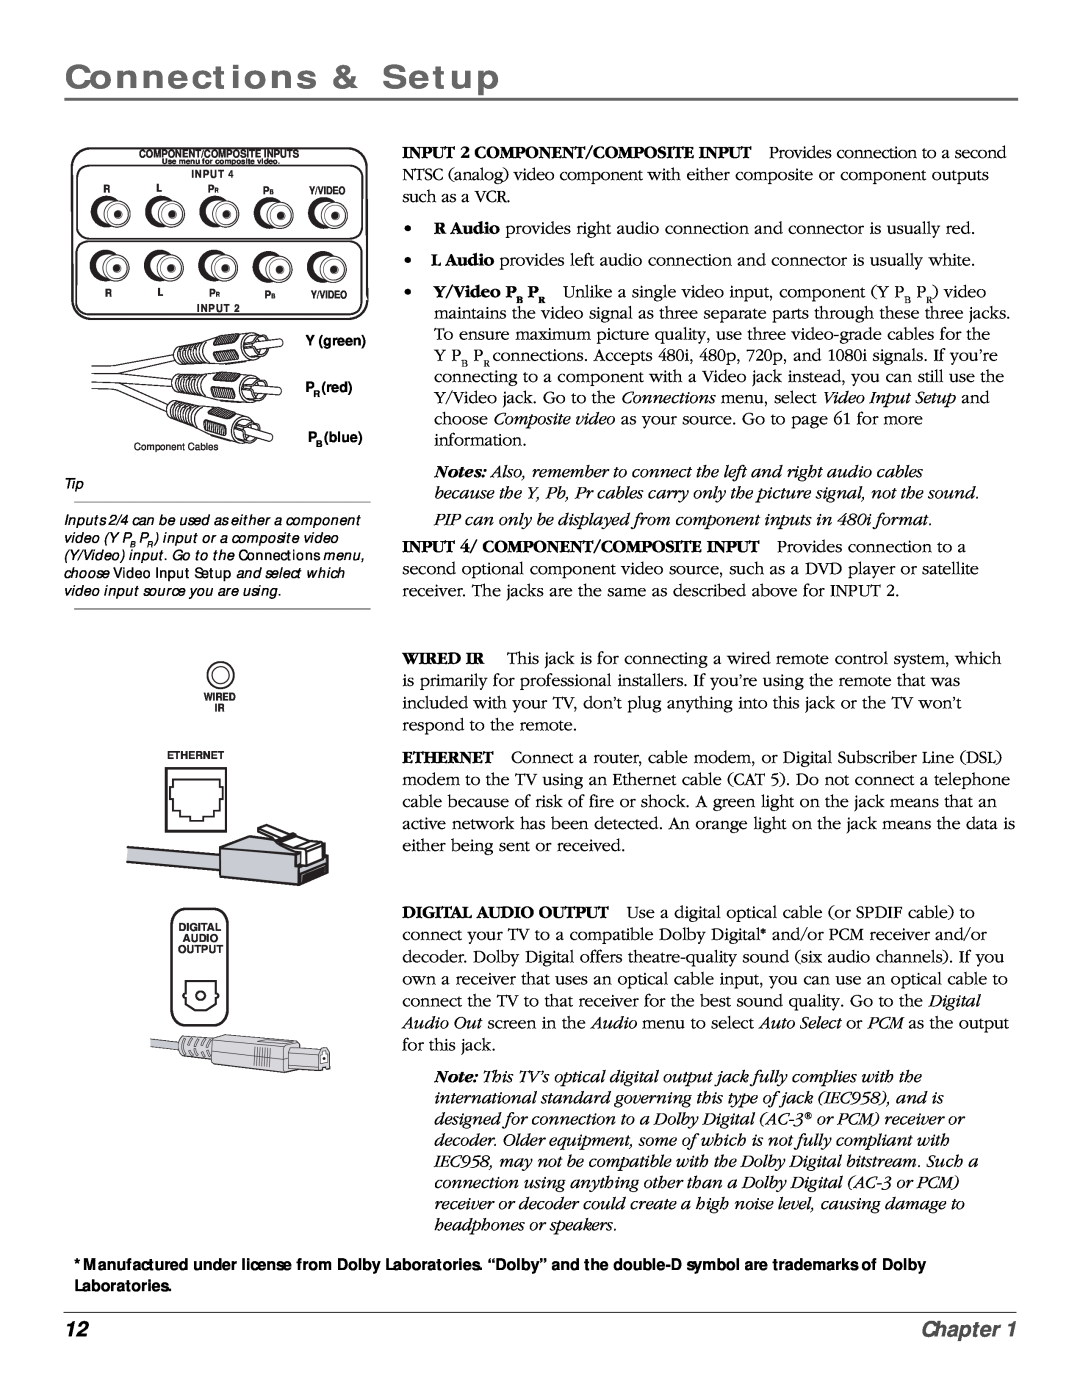 RCA scenium manual Connections & Setup, Chapter, PIP can only be displayed from component inputs in 480i format 